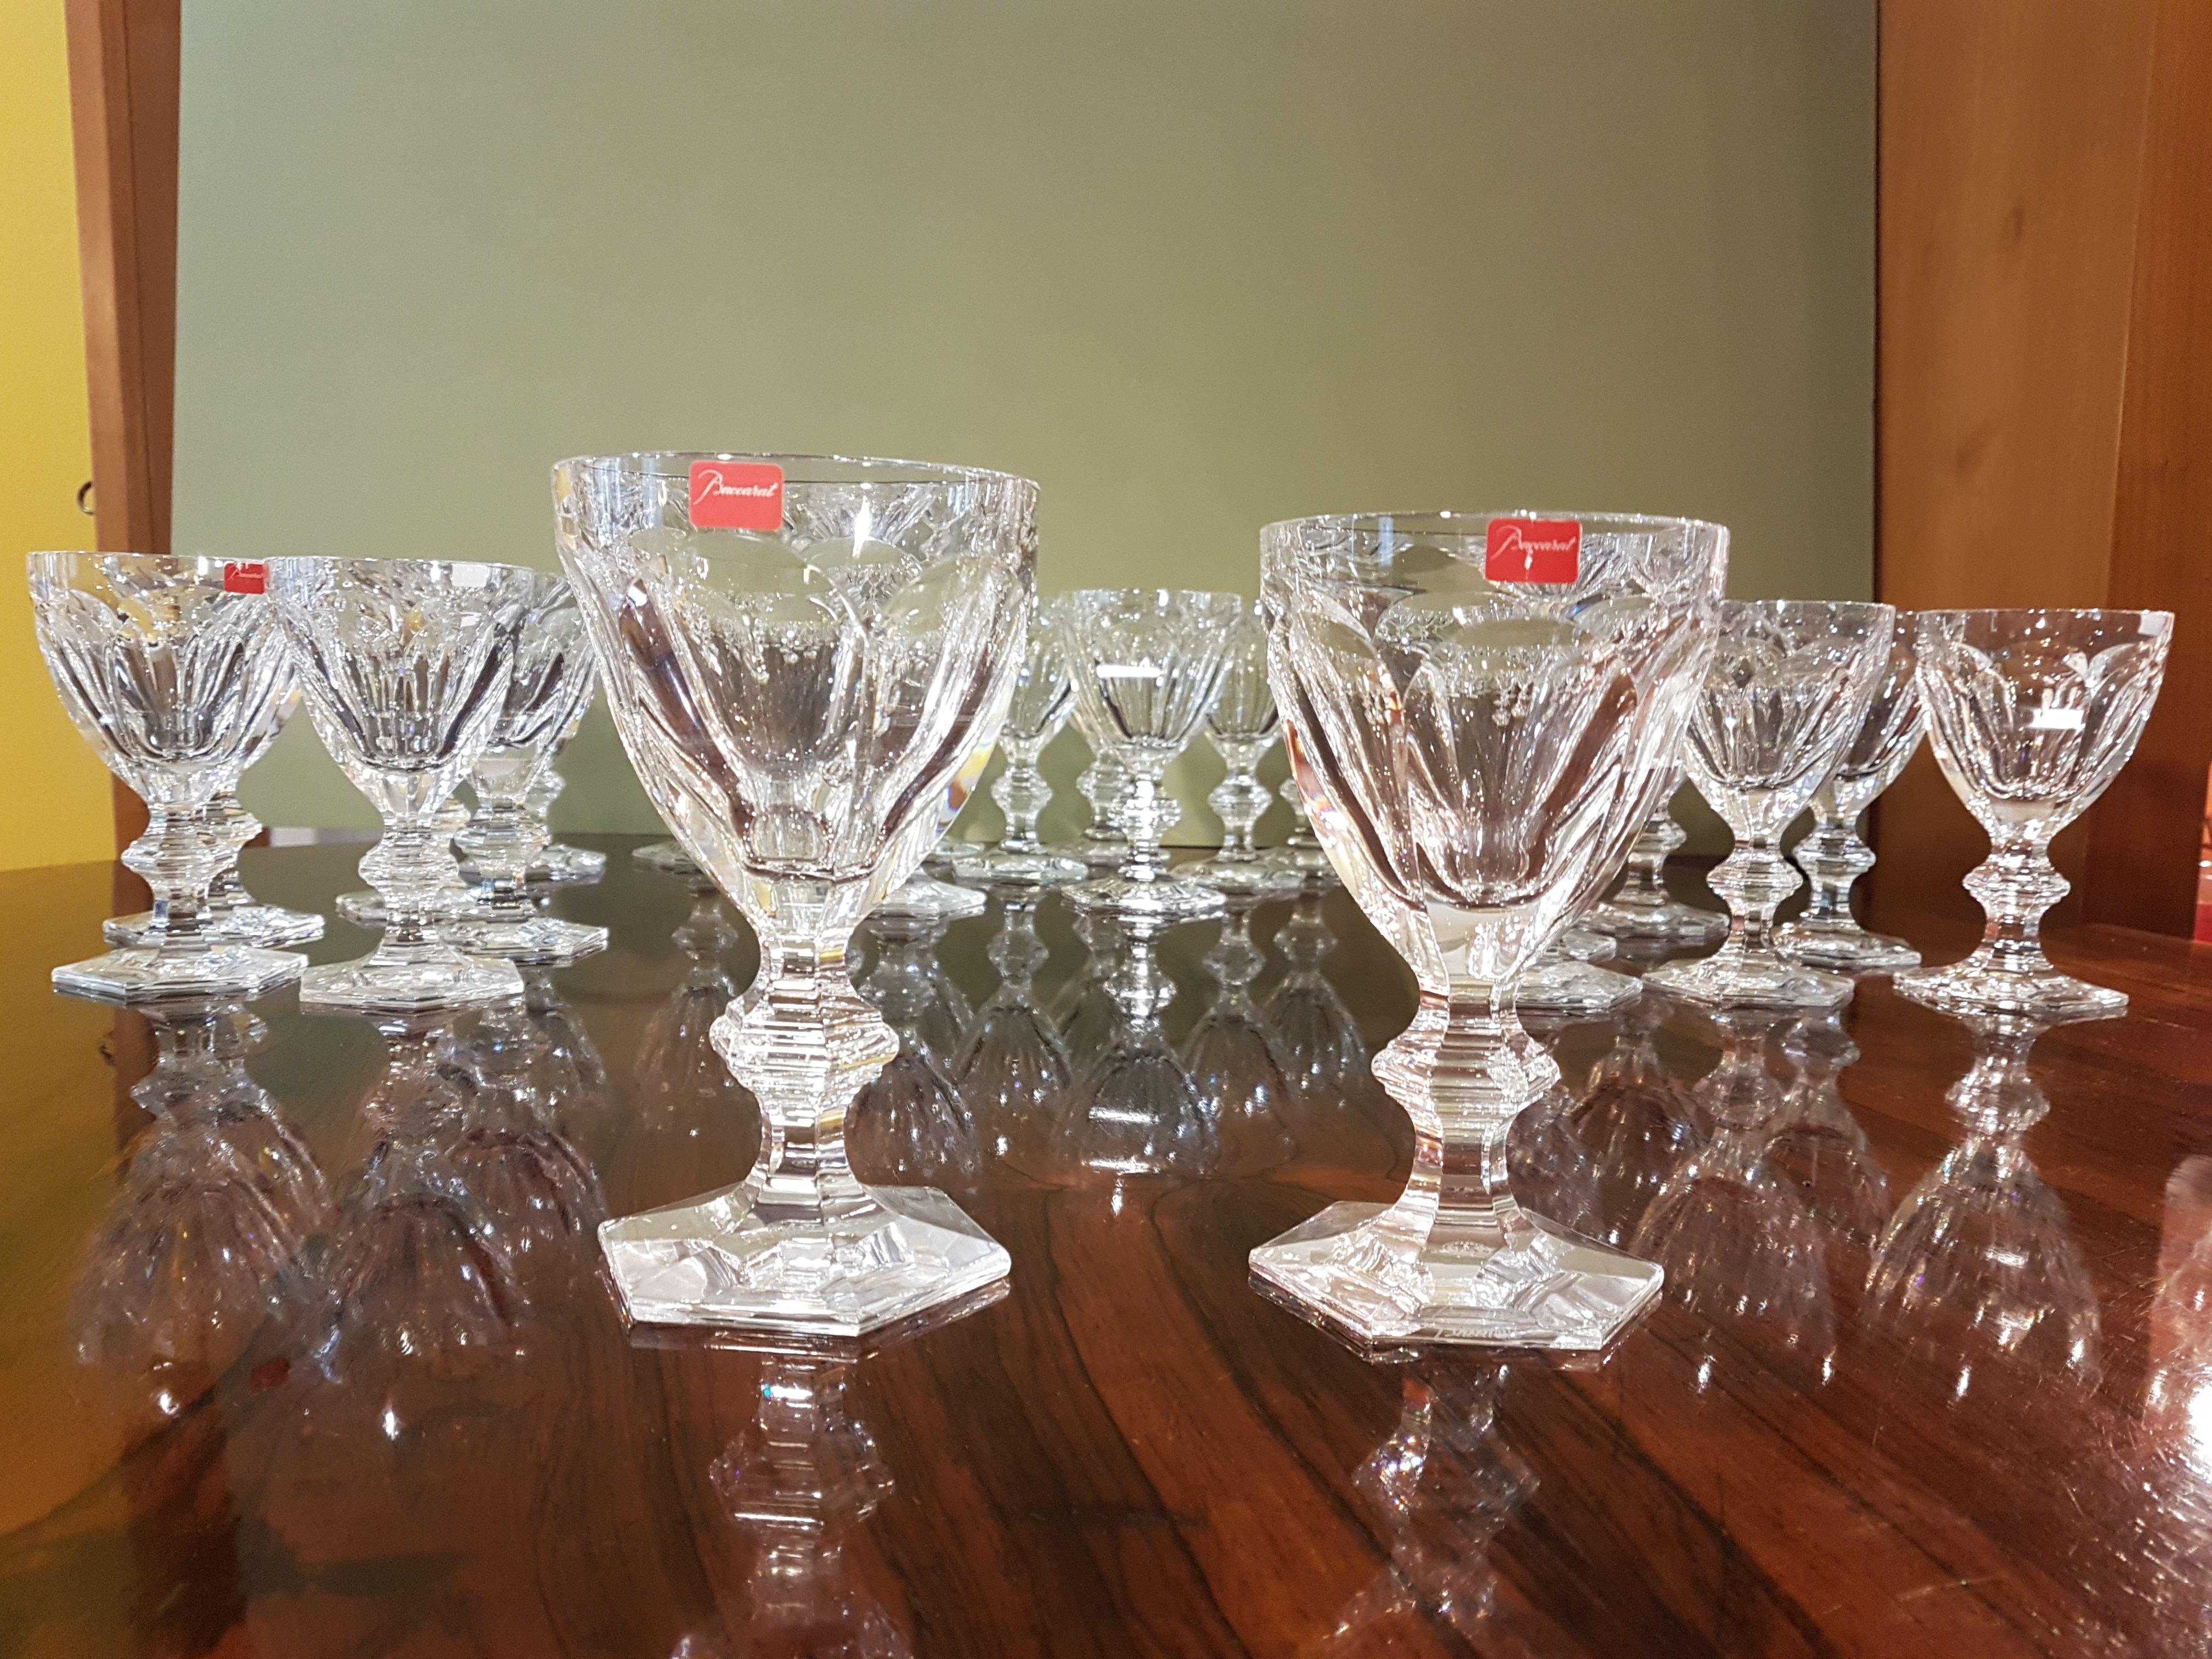 The Harcourt 1841 collection, the oldest in the Baccarat archive, is reputed for its iconic design. Created in 1841, Harcourt stemware has been chosen by historical icons.
Comprising:
12 American water glass H 16.5 cm
12 continental water/wine